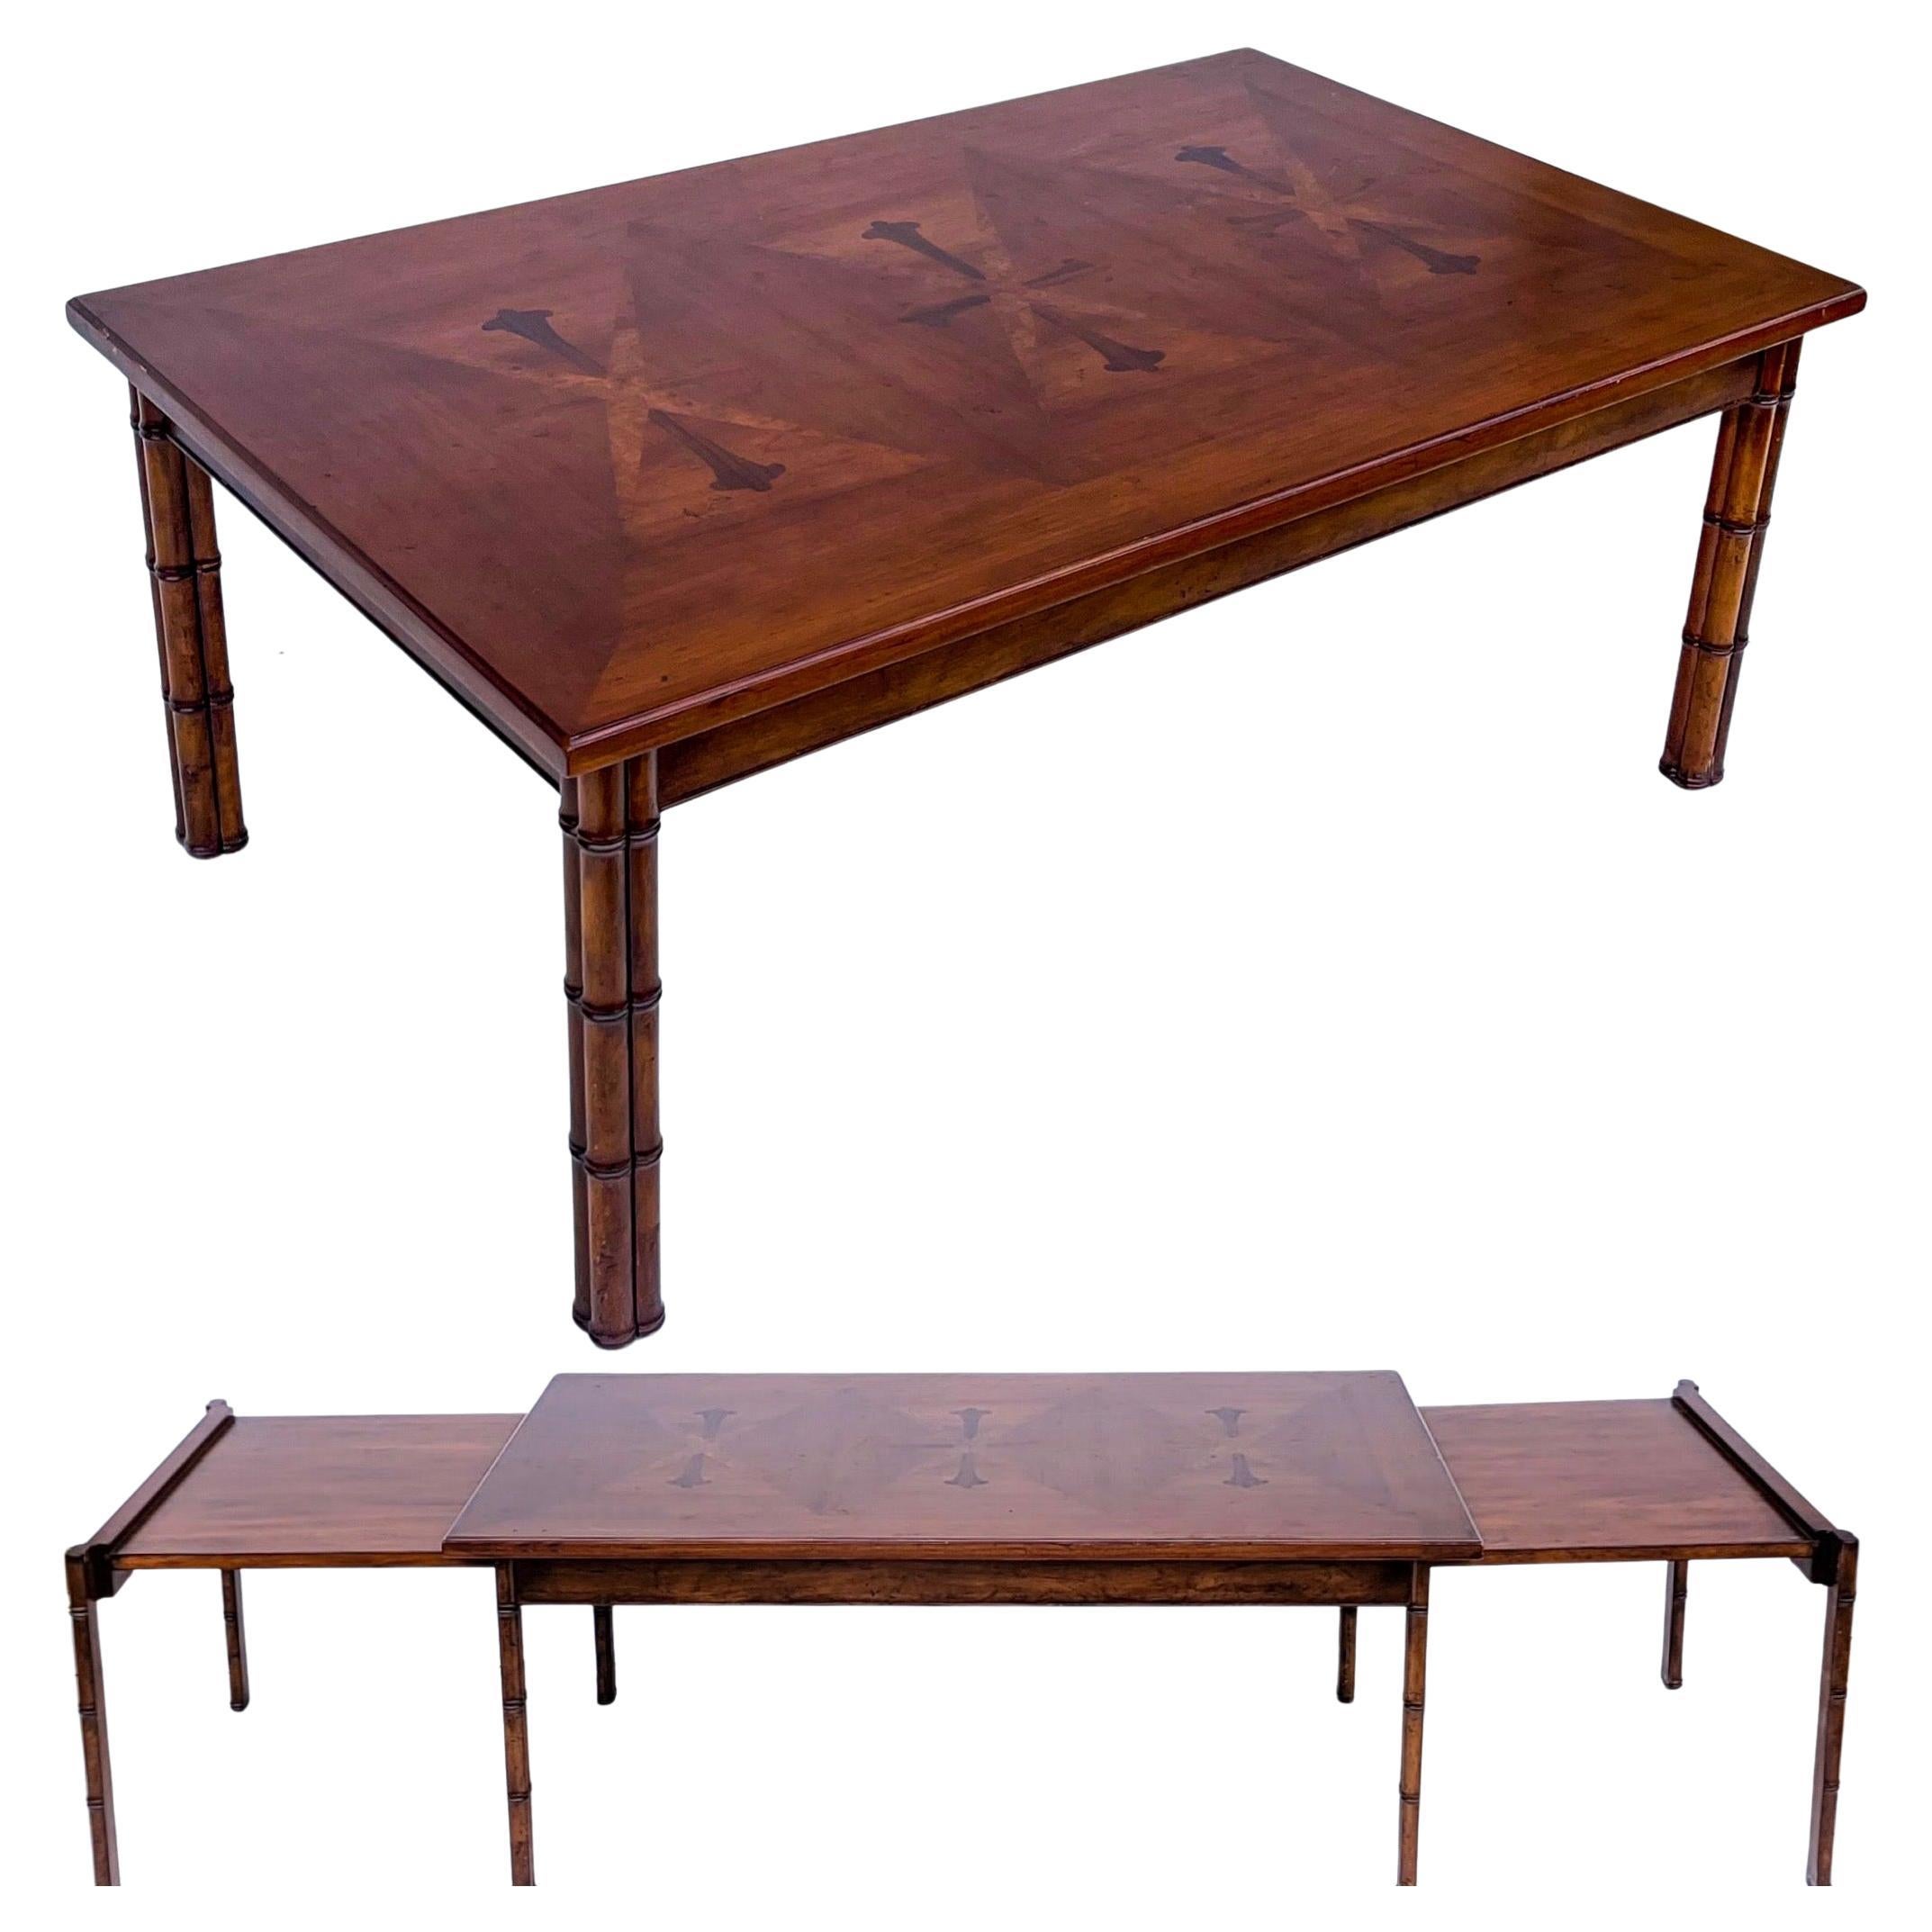 1960s Regency Style Faux Bamboo Cherry / Rosewood Inlaid Extension Coffee Table